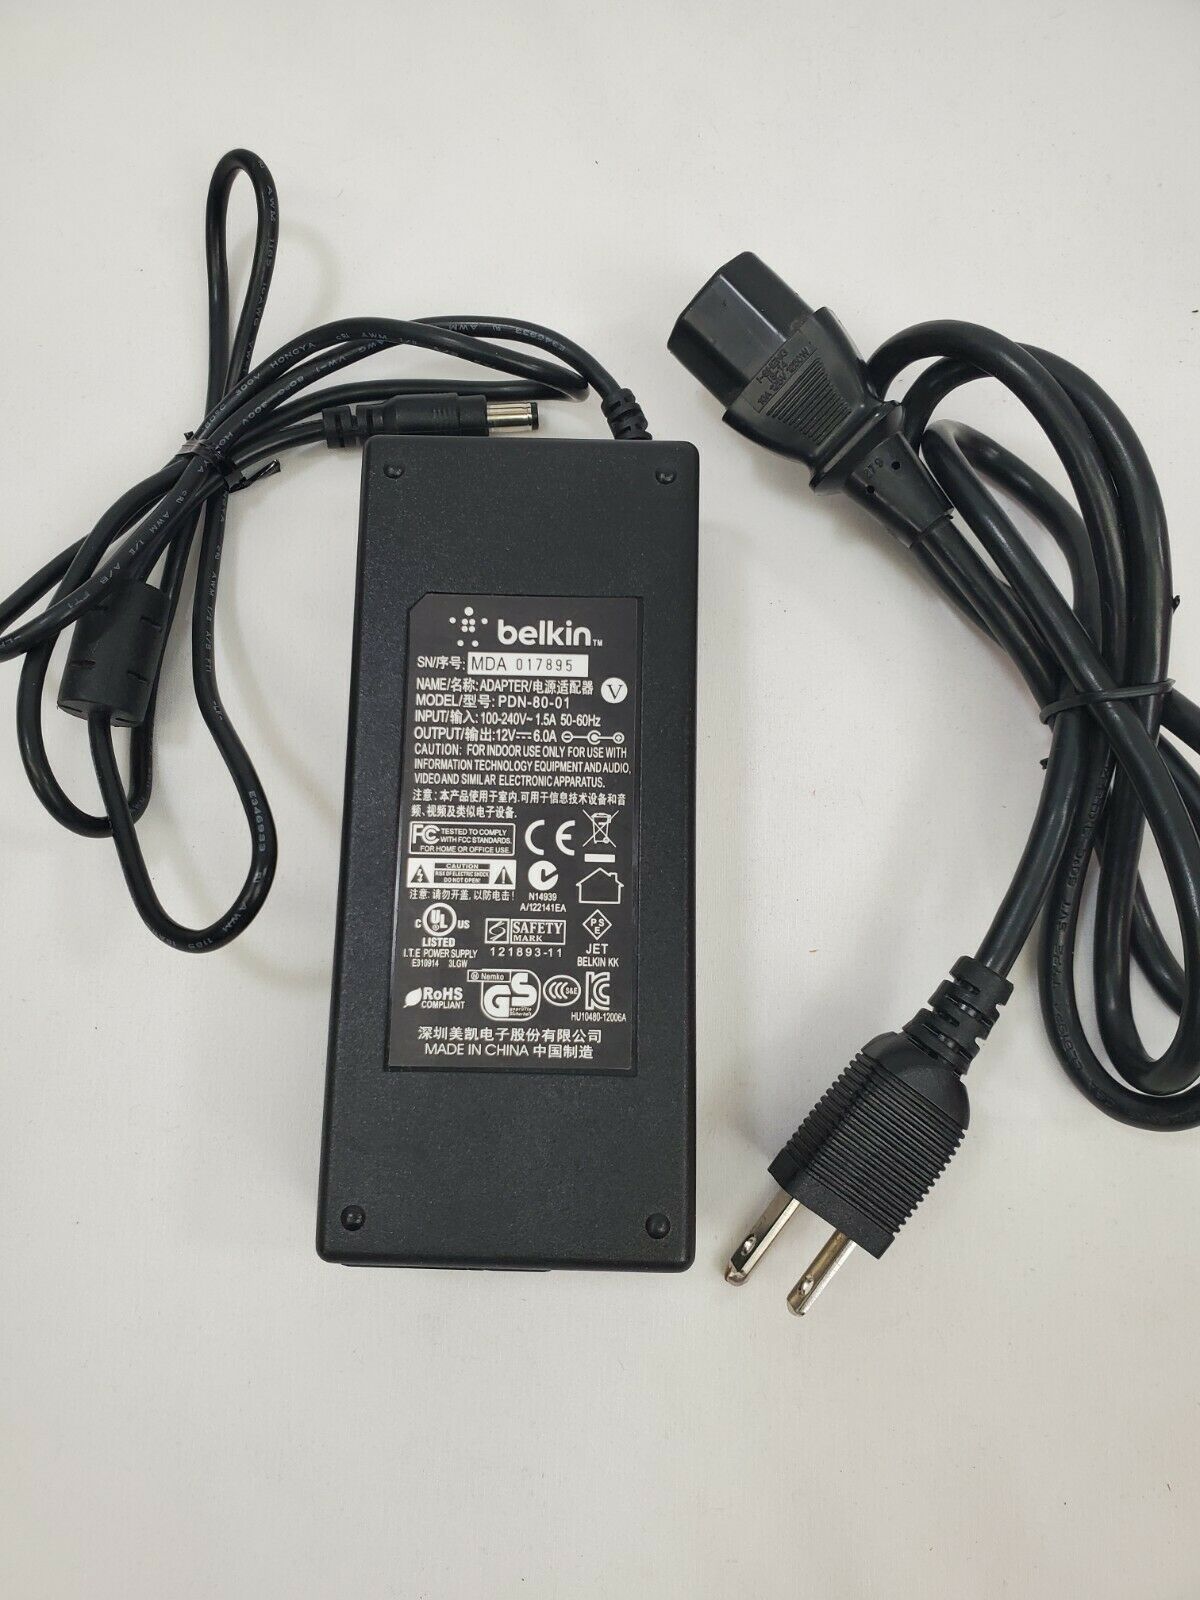 Genuine Belkin PDN-80-01 AC Adapter Type: AC/DC Adapter Brand: Belkin Up for sale is a Genuine Belkin PDN-80-01 AC A - Click Image to Close